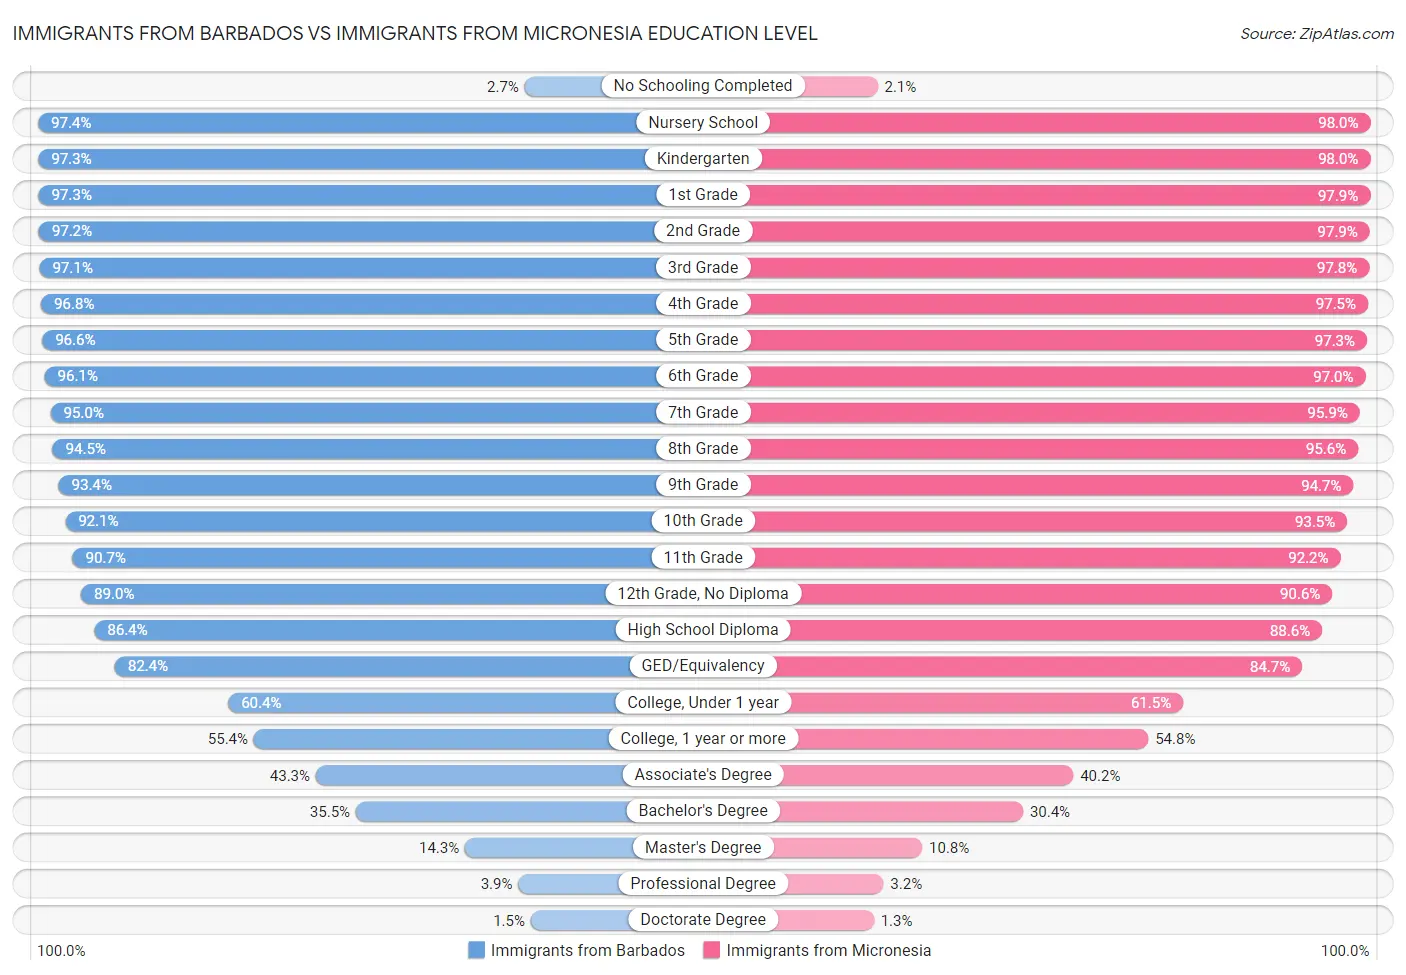 Immigrants from Barbados vs Immigrants from Micronesia Education Level